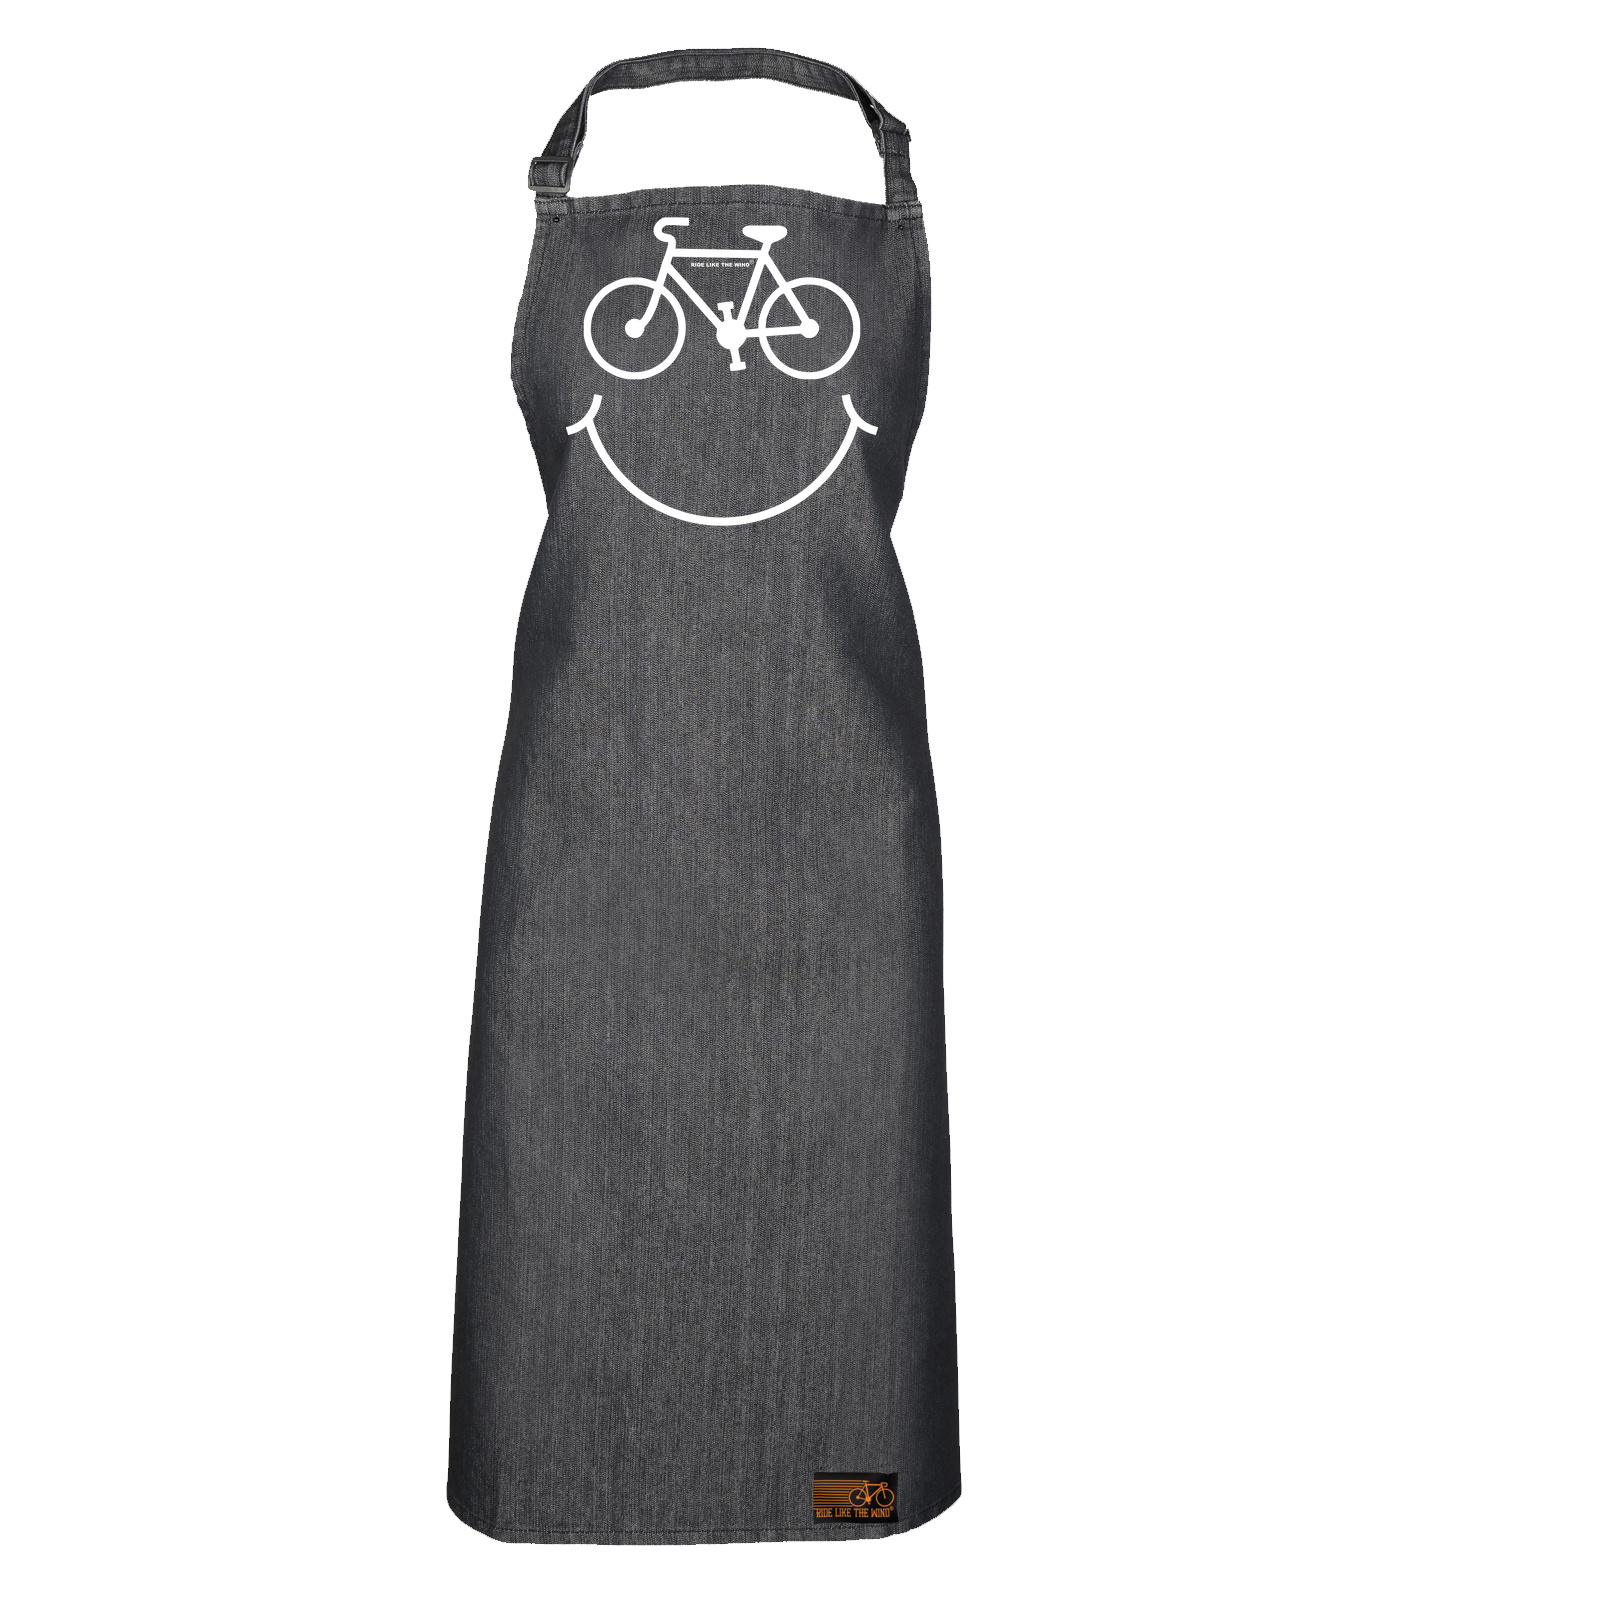 Cycling Apron Funny Novelty Kitchen Cooking Cycle Smile 